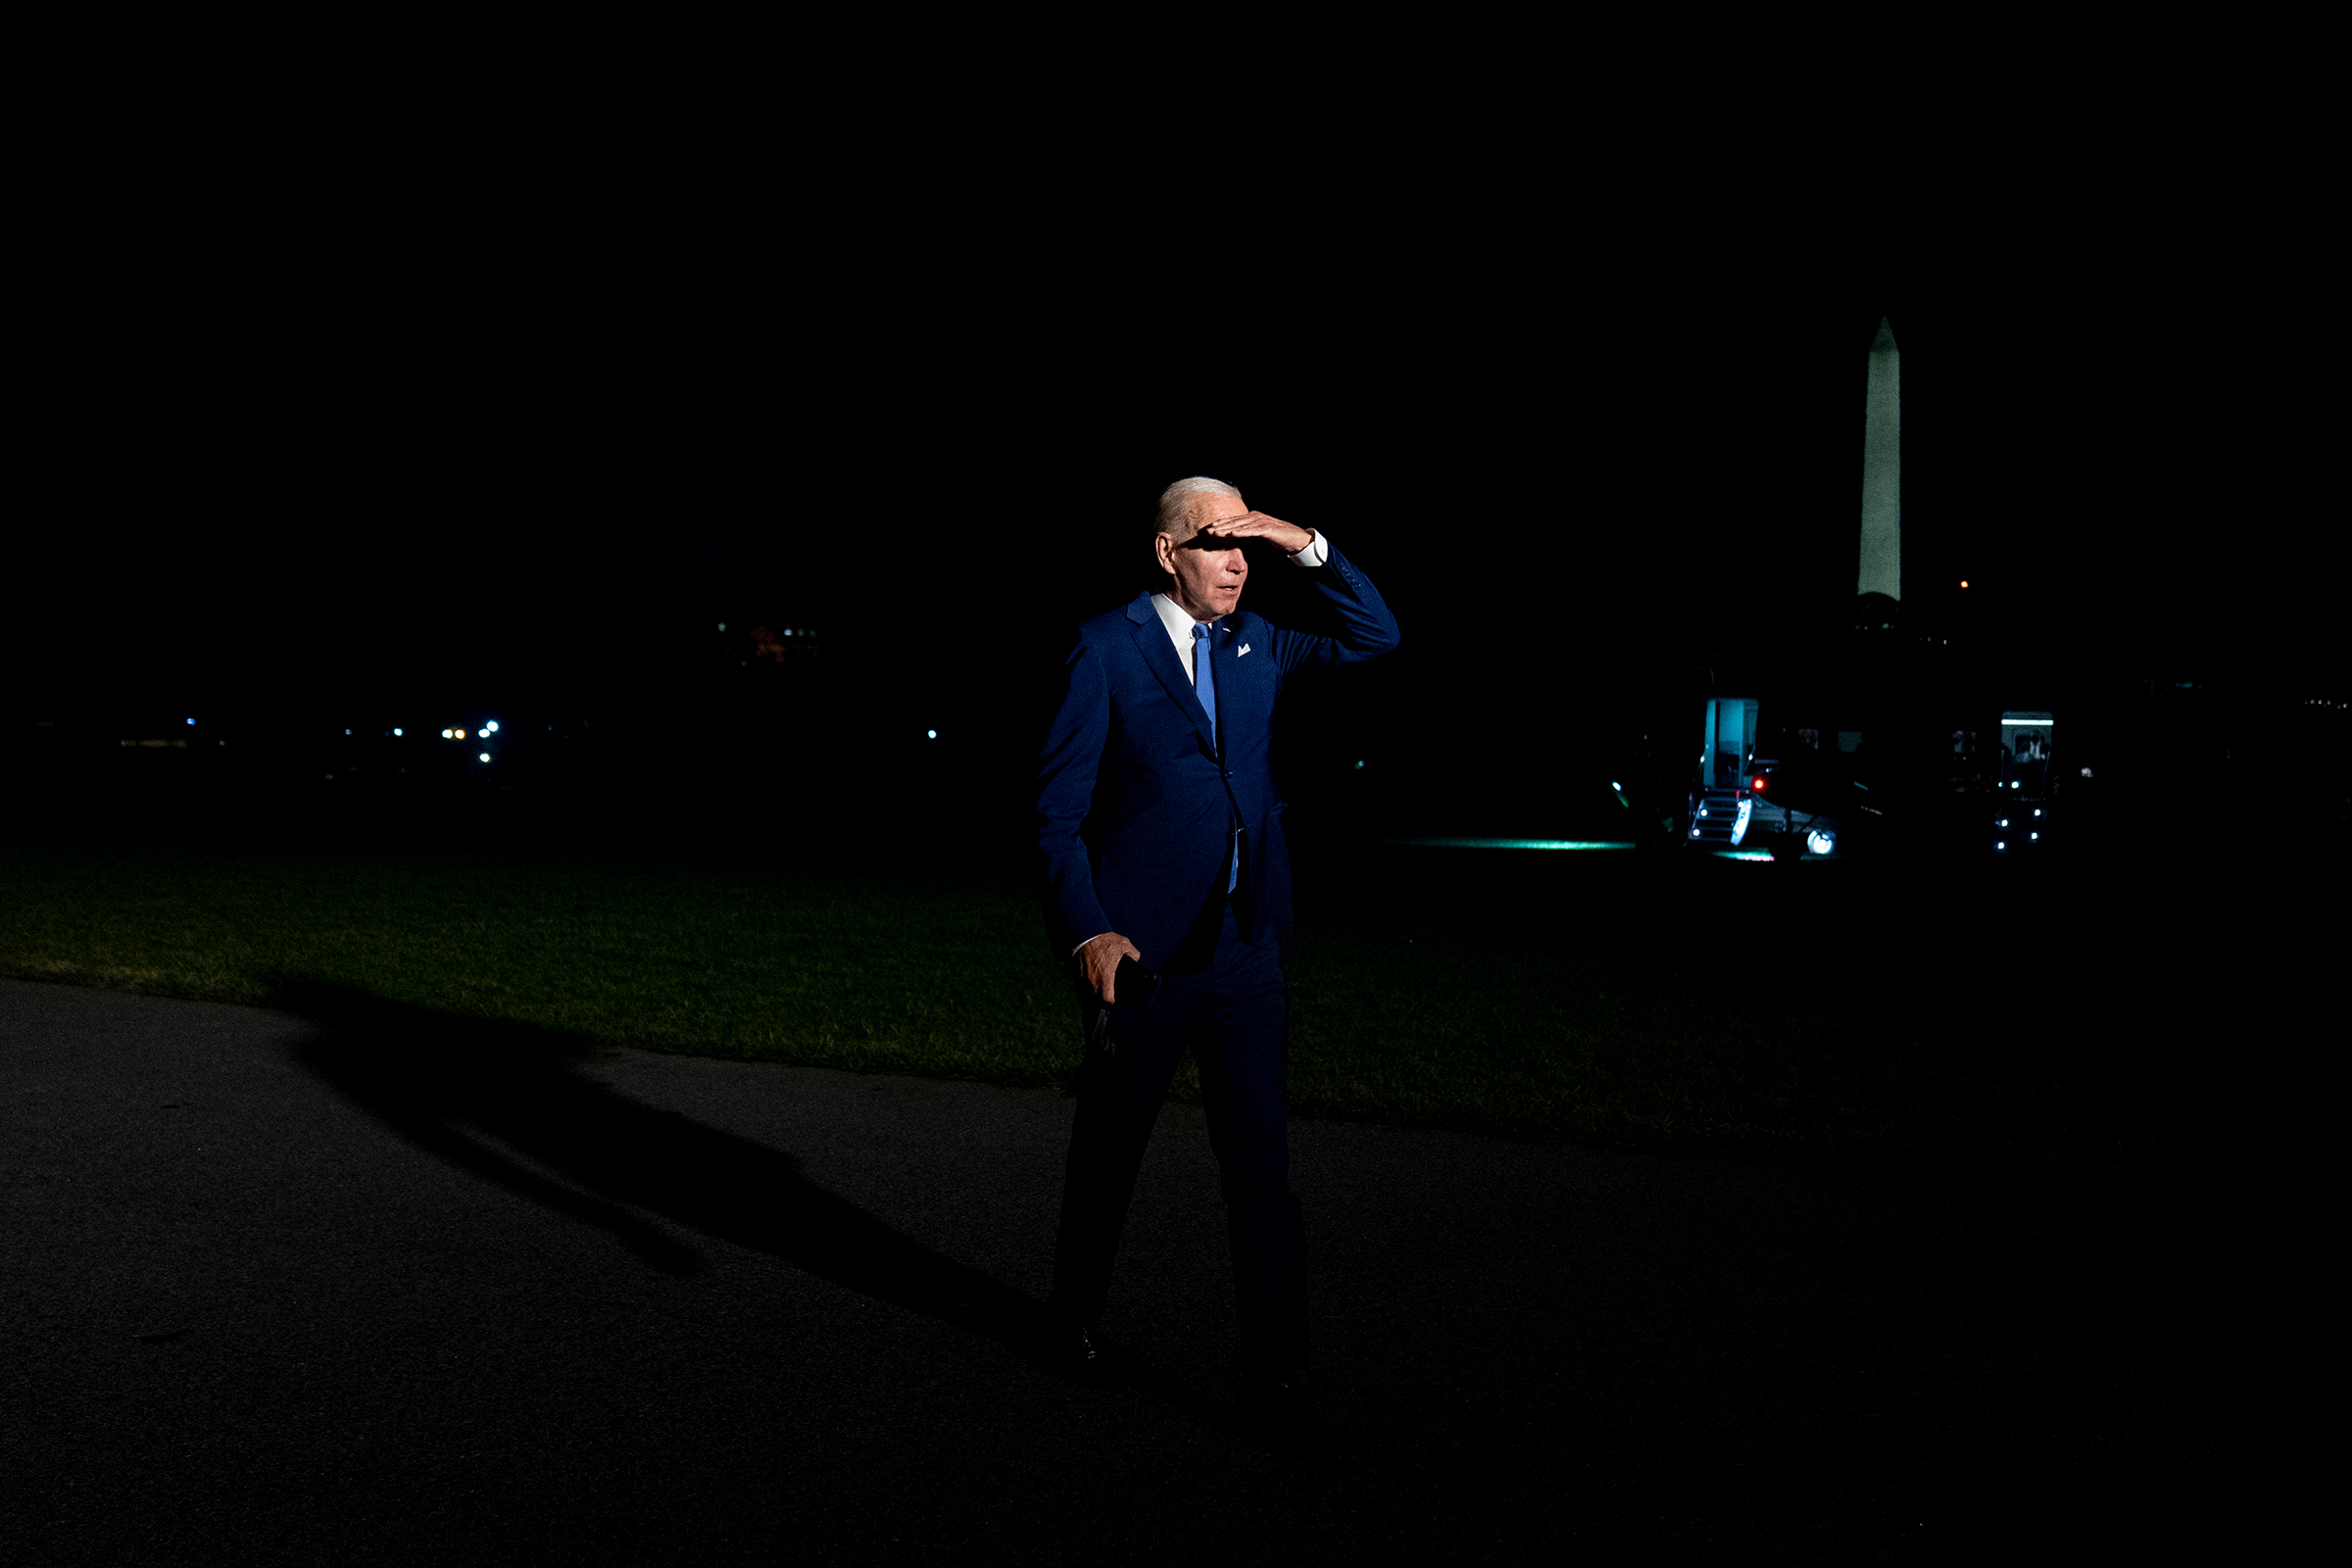 President Joe Biden arrives at the White House on July 16, 2022, after returning from a trip to Israel and Saudi Arabia.